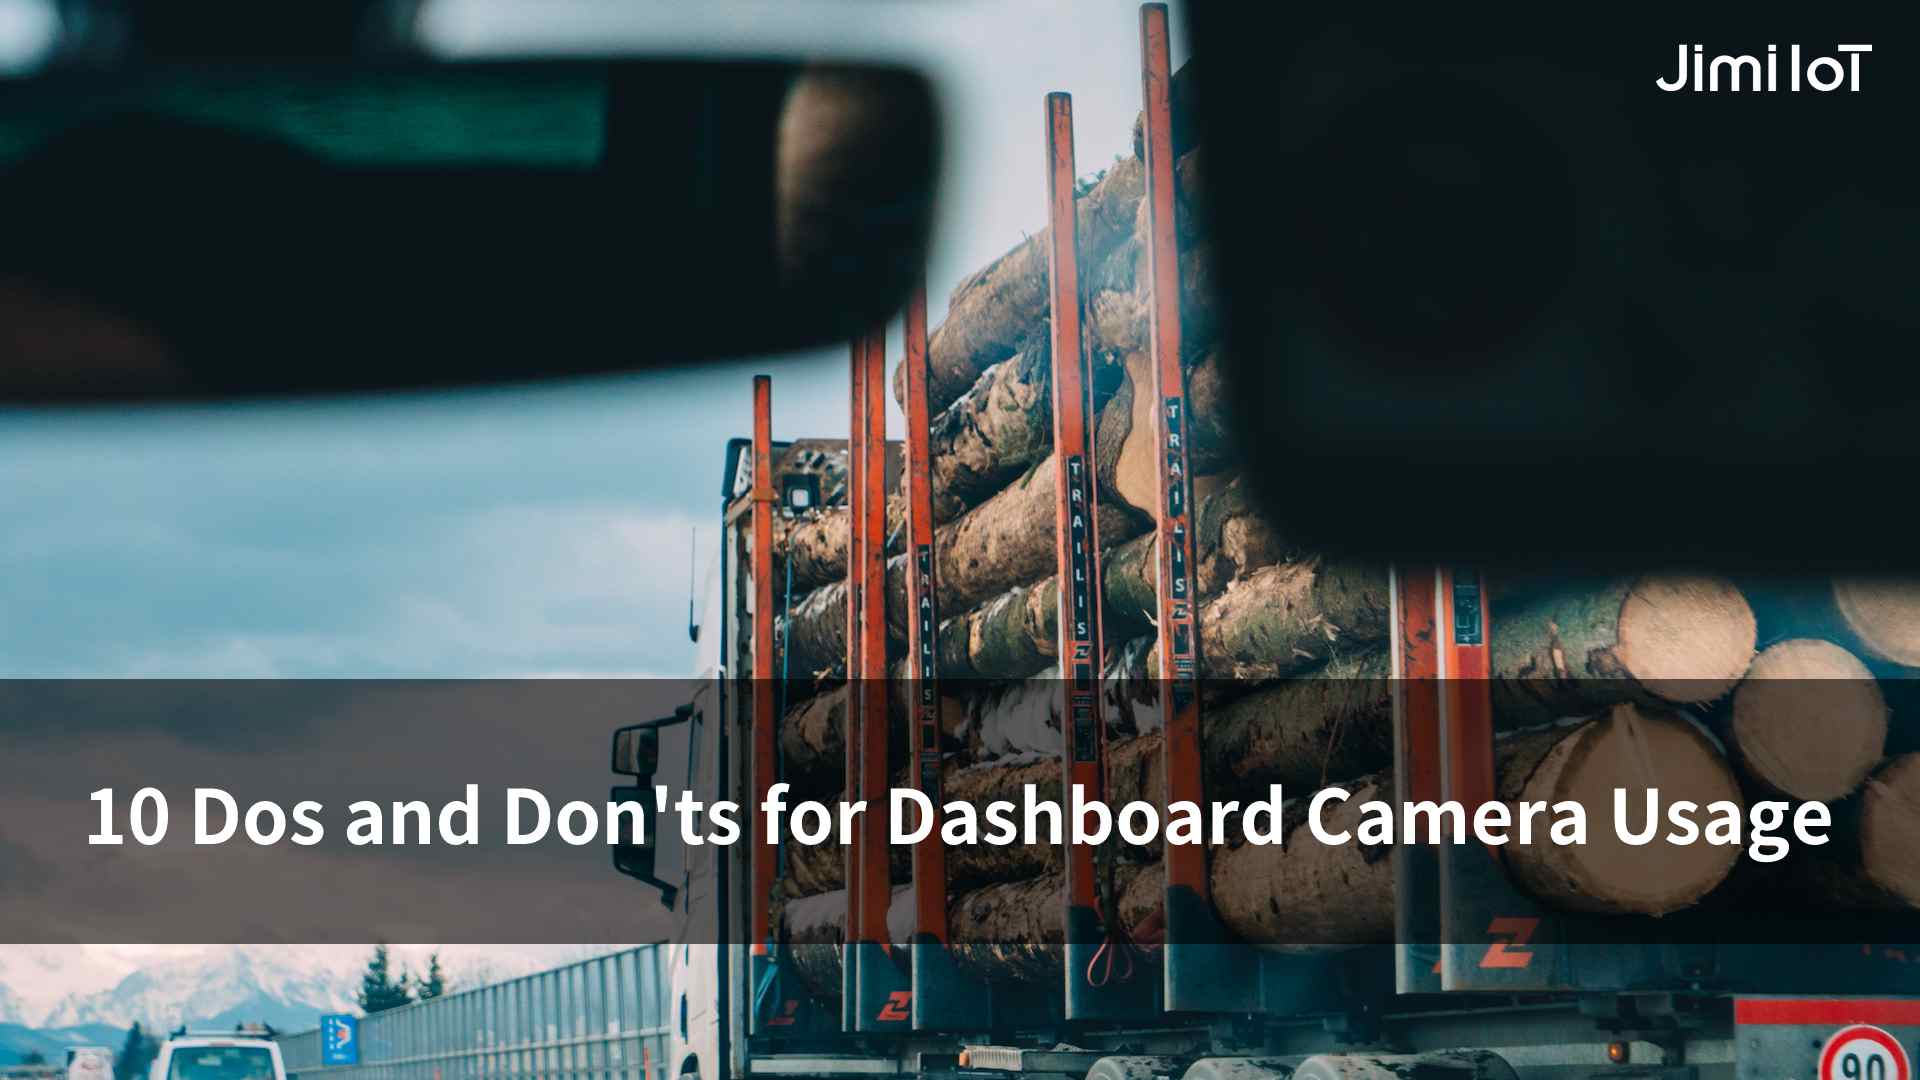 10 Dos and Don'ts for Dashboard Camera Usage